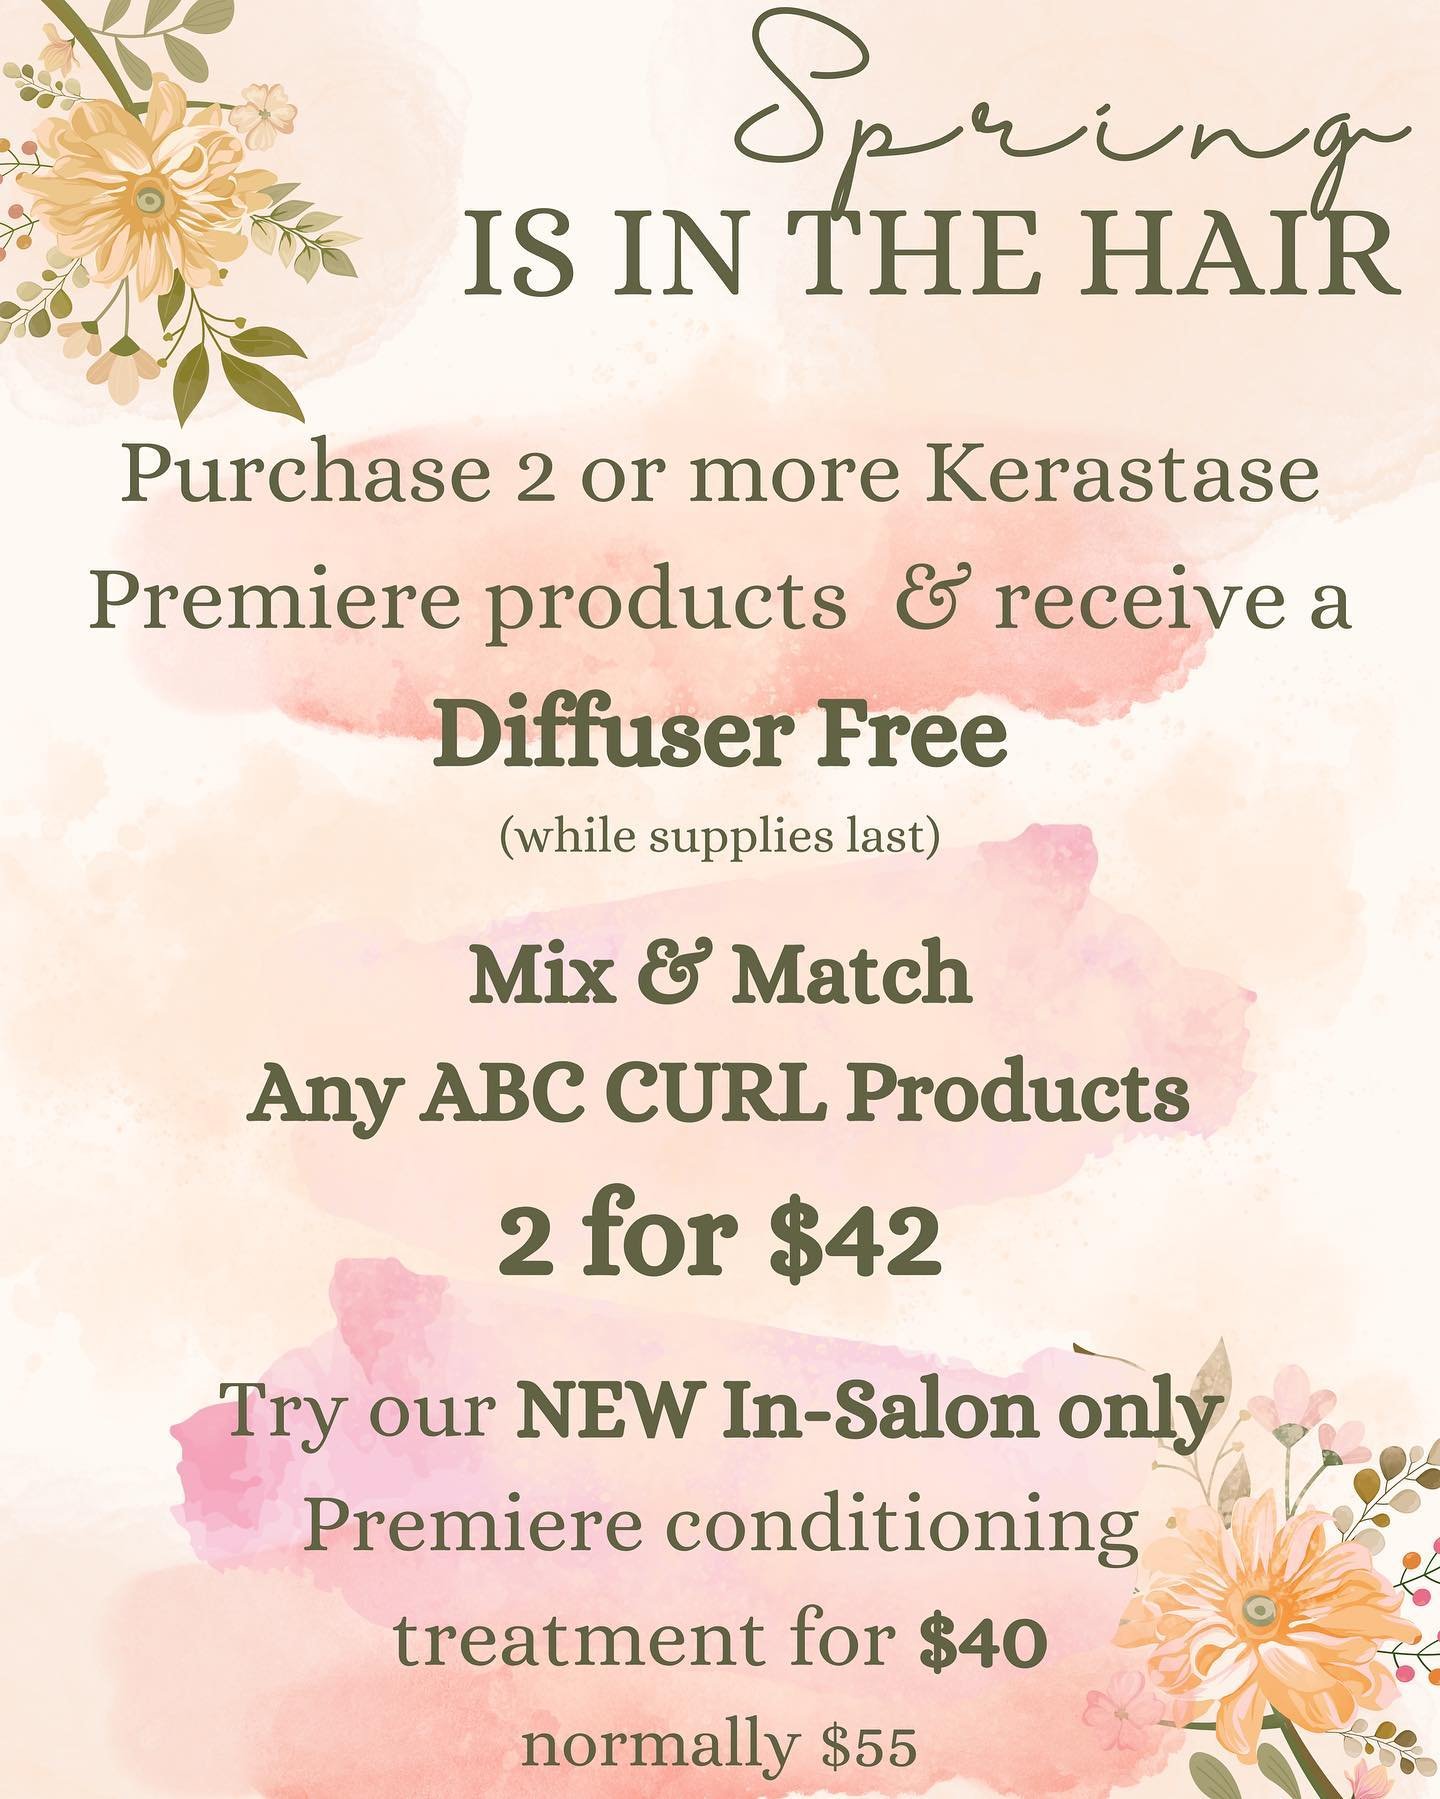 SPRING IS IN THE HAIR 🌸🌷🌿💗 &amp; we have some amazing promotions this month. Mother&rsquo;s Day is coming up on May 12 so make sure you treat your mom (or yourself tbh) to one of our Mother&rsquo;s Day packages 😊

To make an appointment, give us